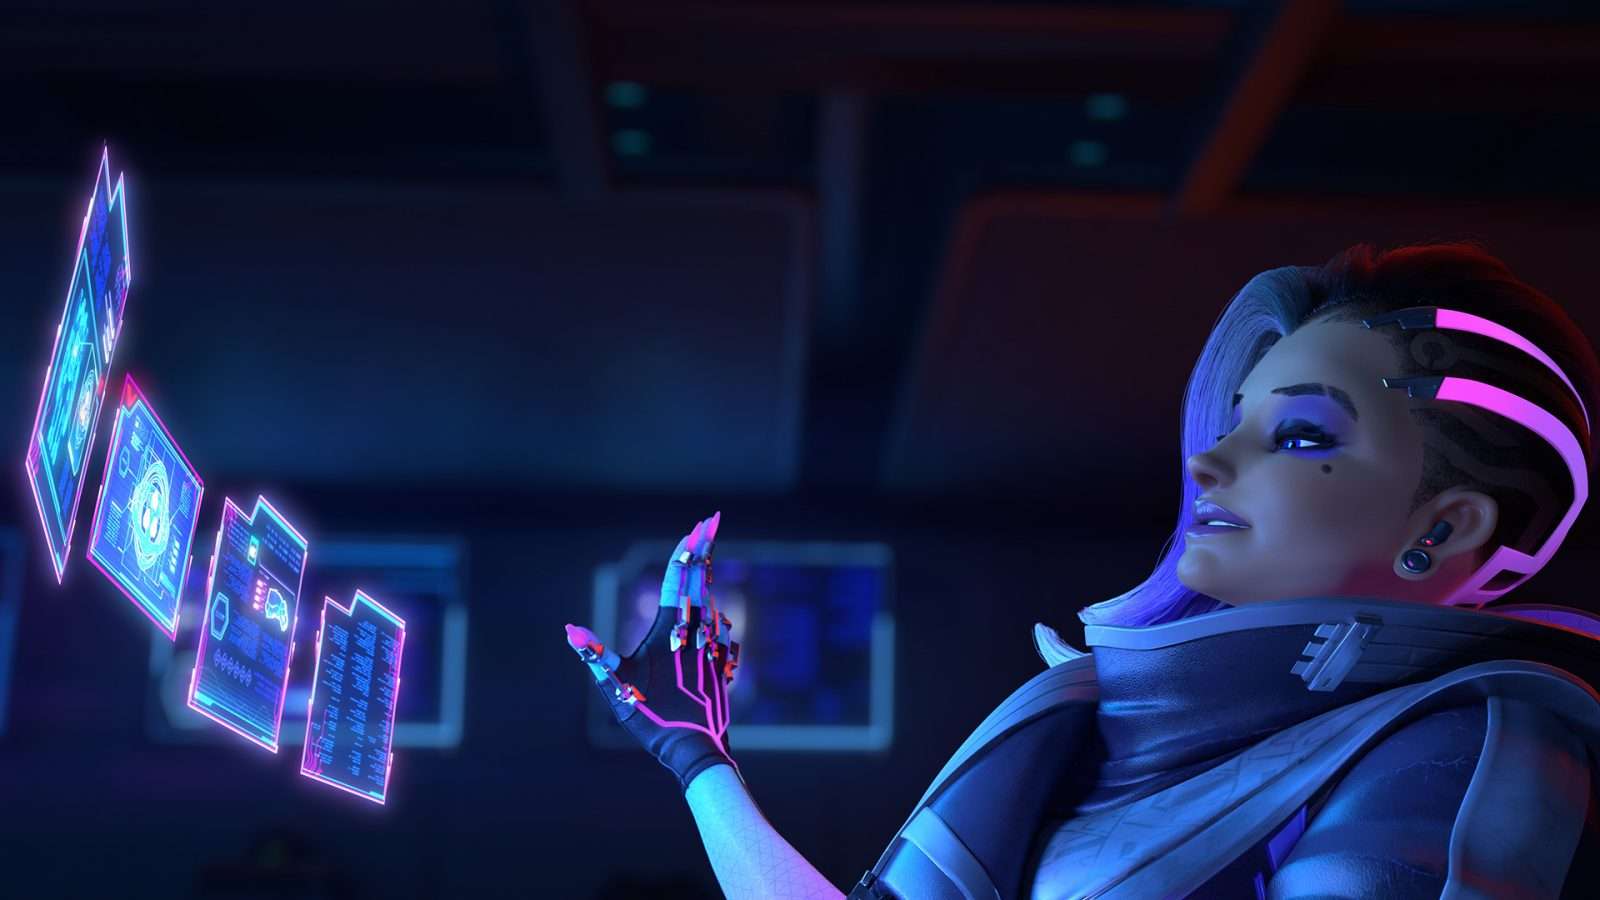 Sombra swiping on her computer screens